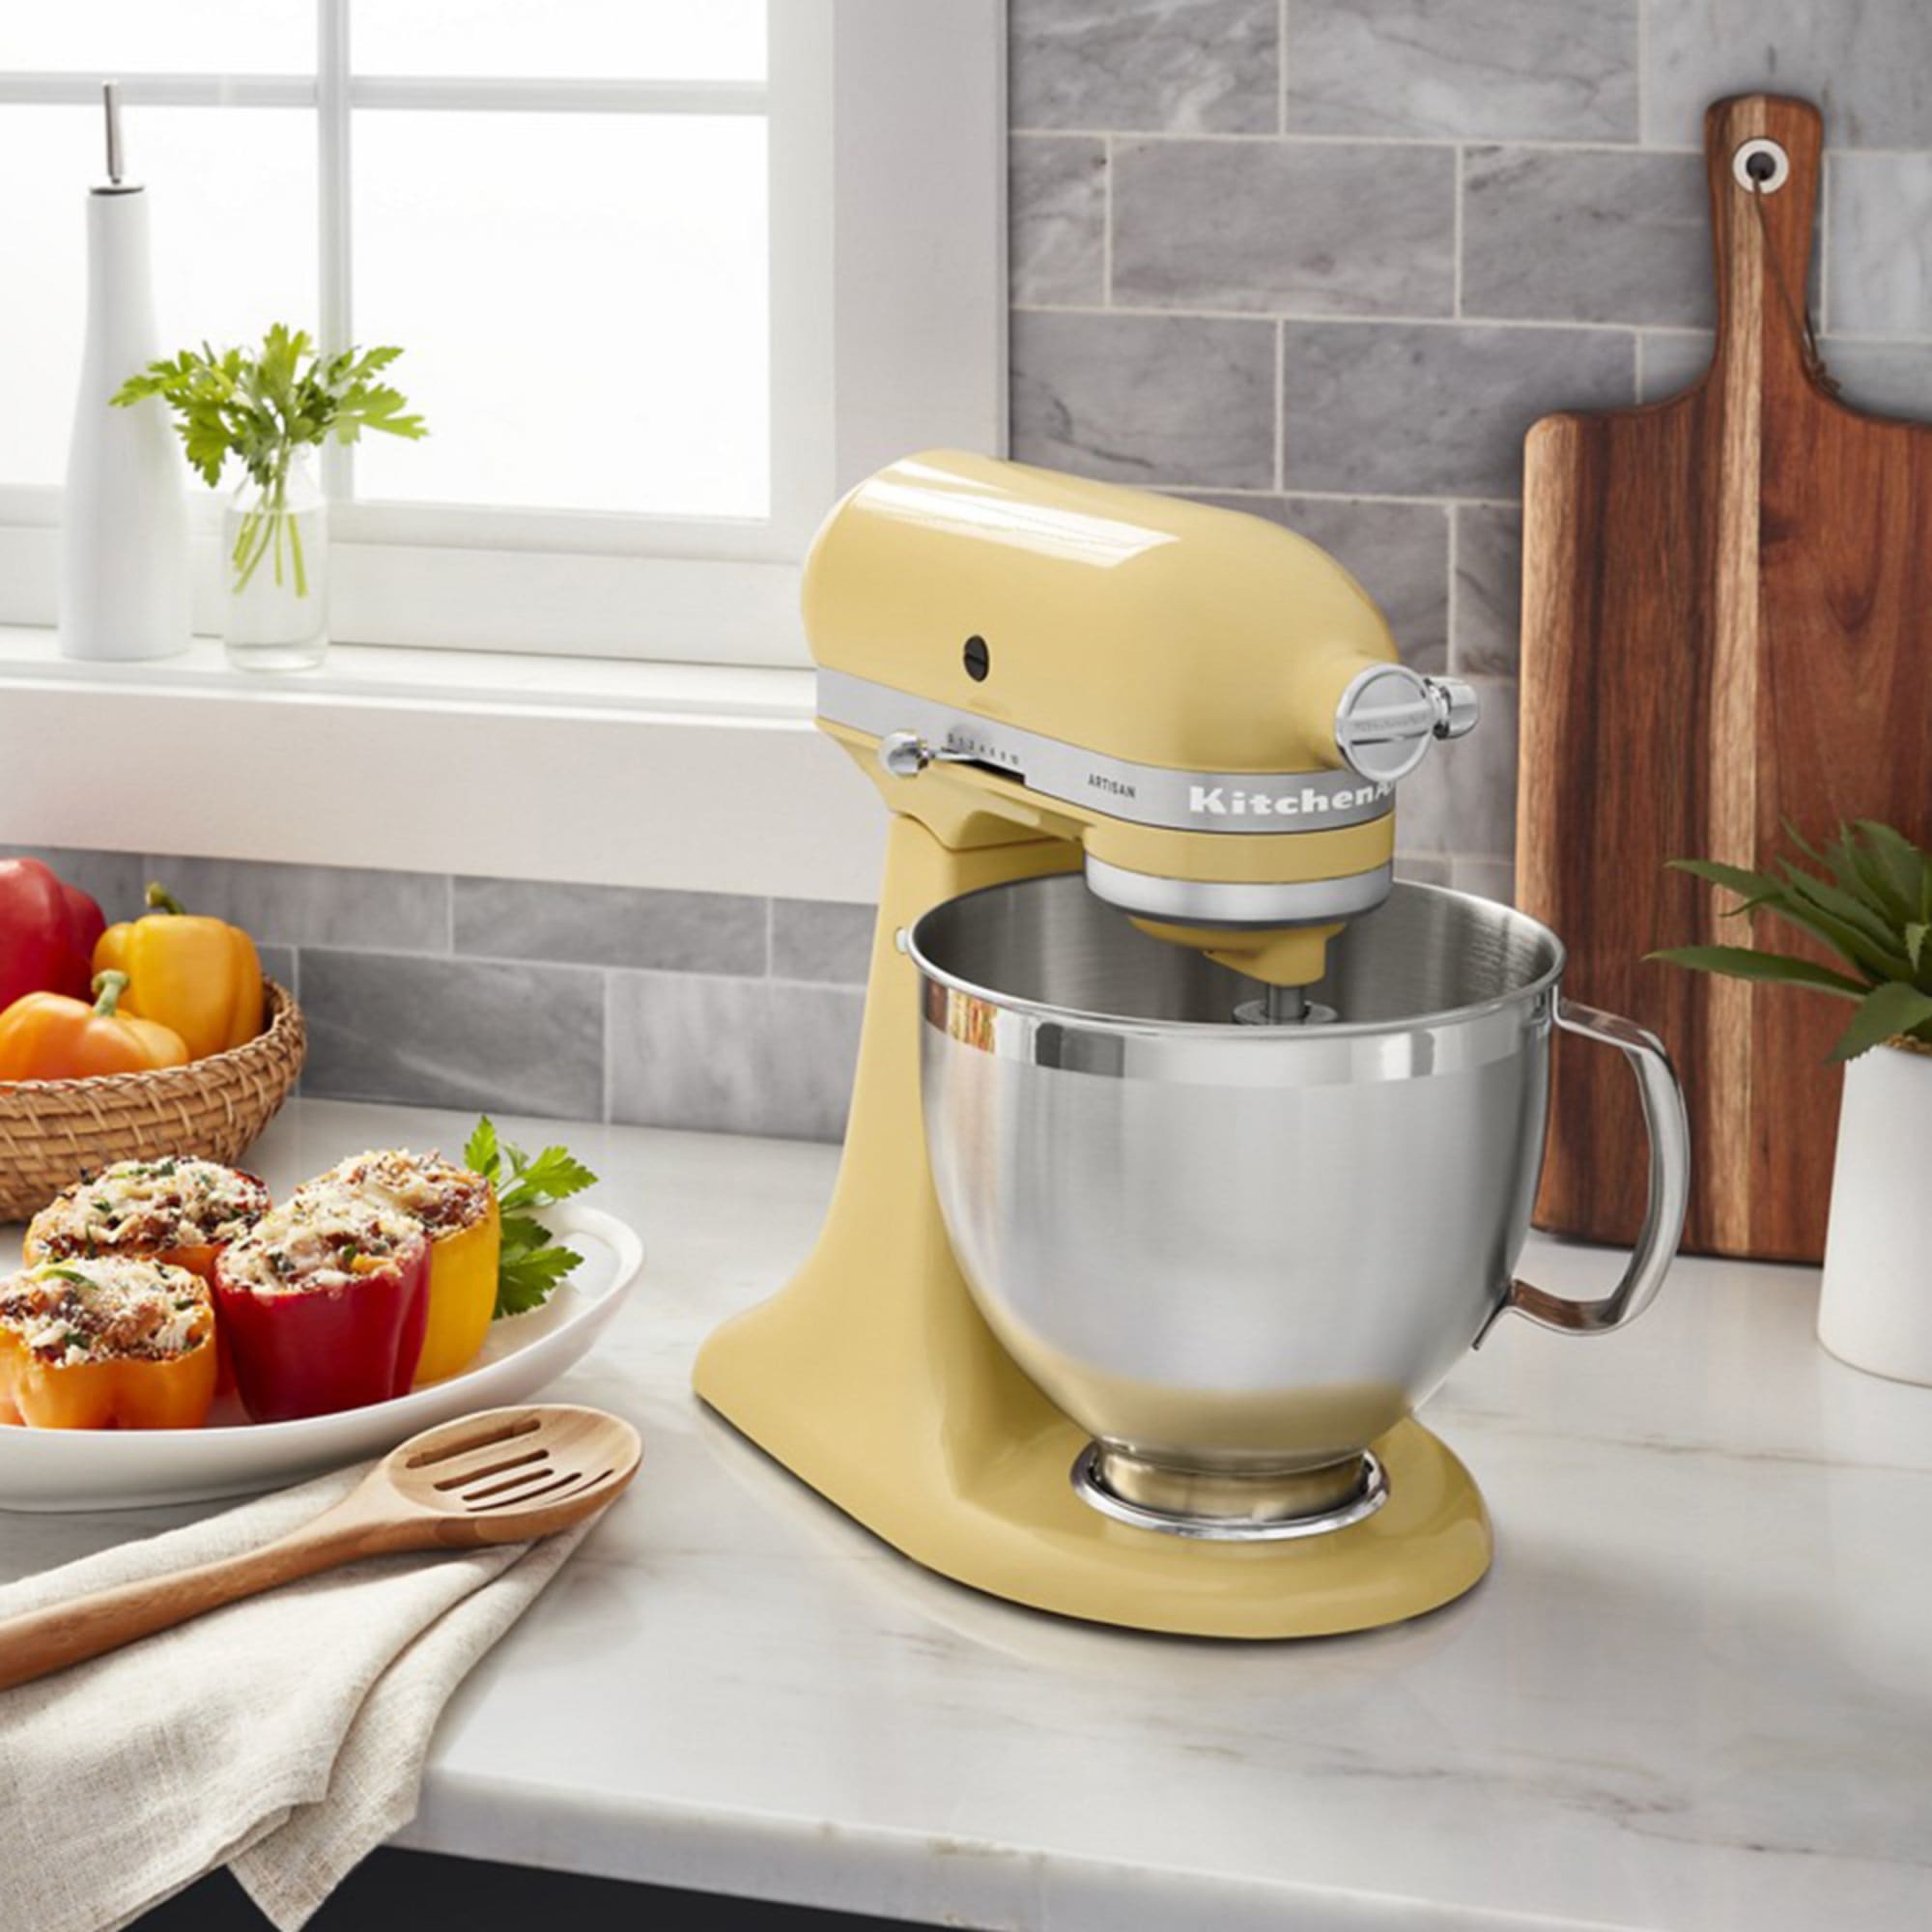 https://res.cloudinary.com/kitchenwarehouse/image/upload/c_fill,g_face,w_1250/f_auto/t_PDP_2000x2000/Supplier%20Images%20/2000px/KitchenAid-Artisan-KSM195-Stand-Mixer-Majestic-Yellow_5_2000px.jpg?imagetype=pdp_full